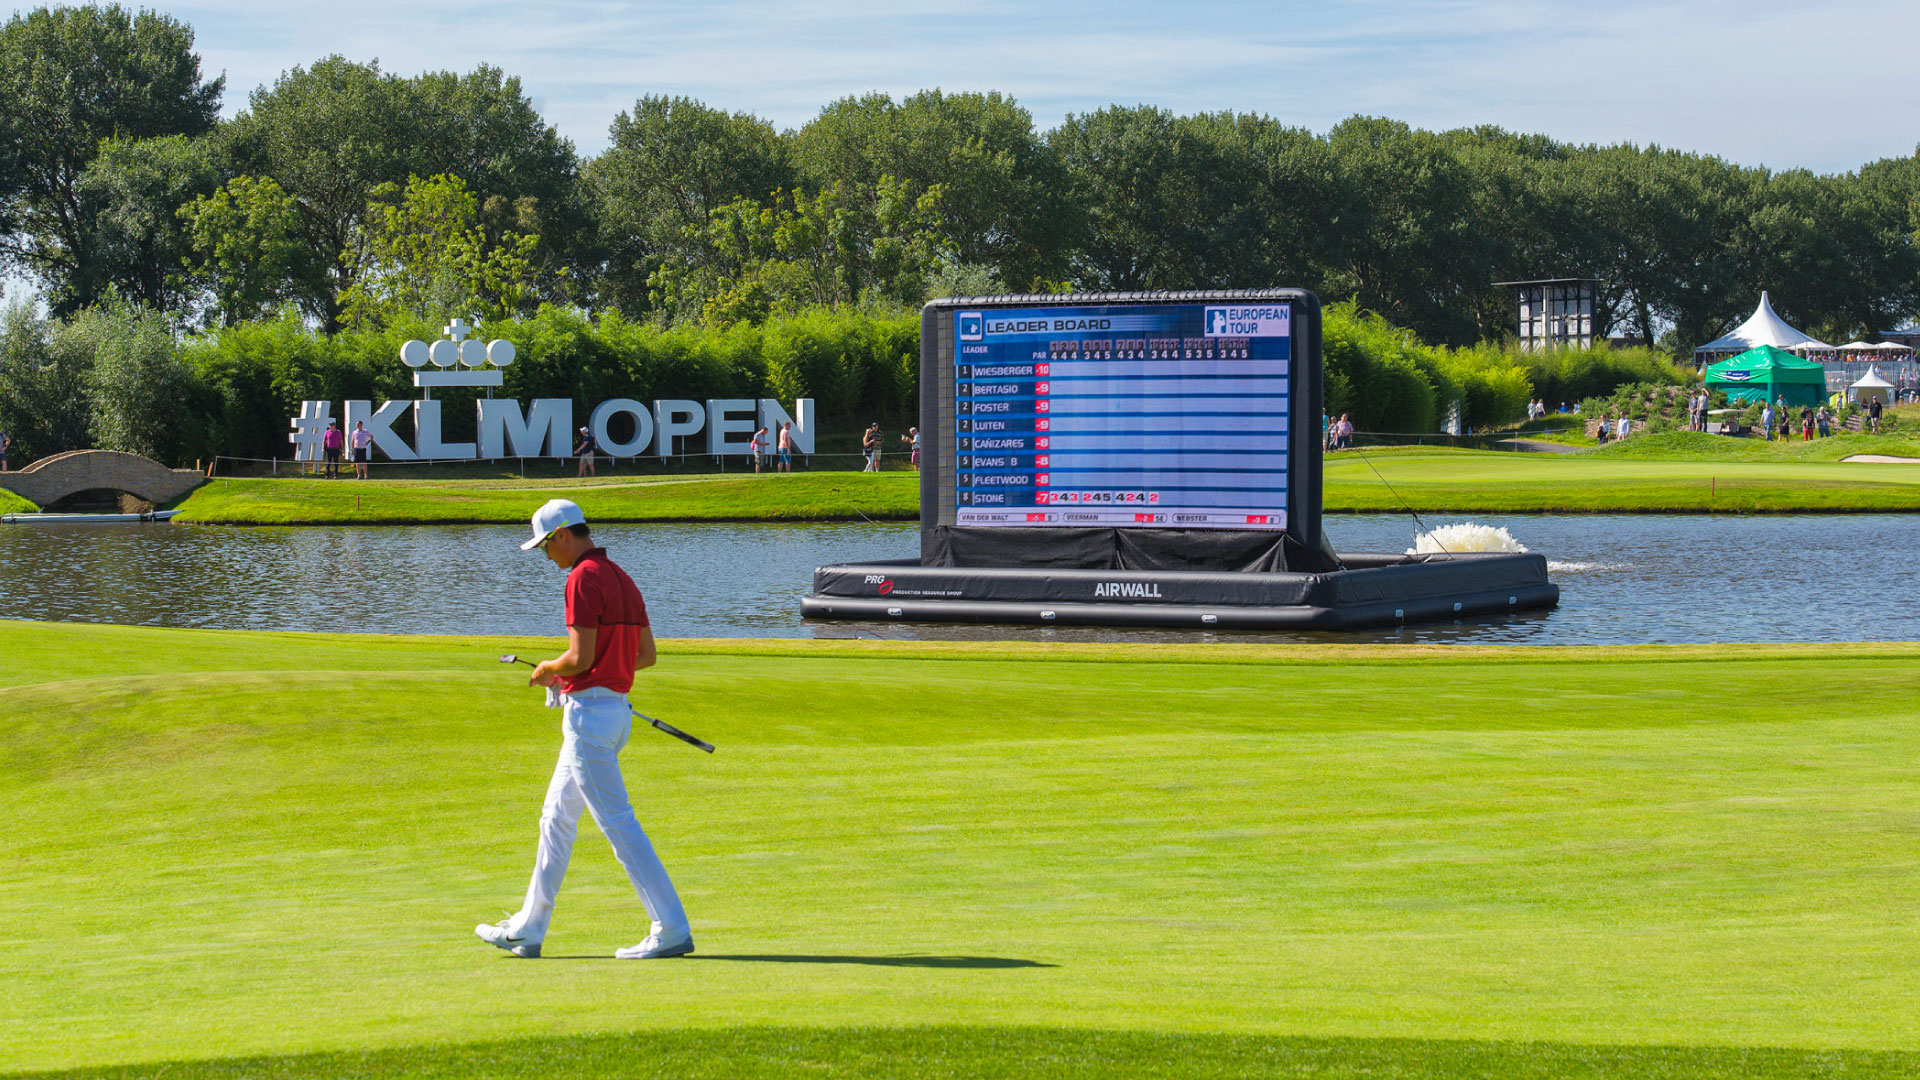 PRG supplied LED screens for the KLM Open Golf Event.